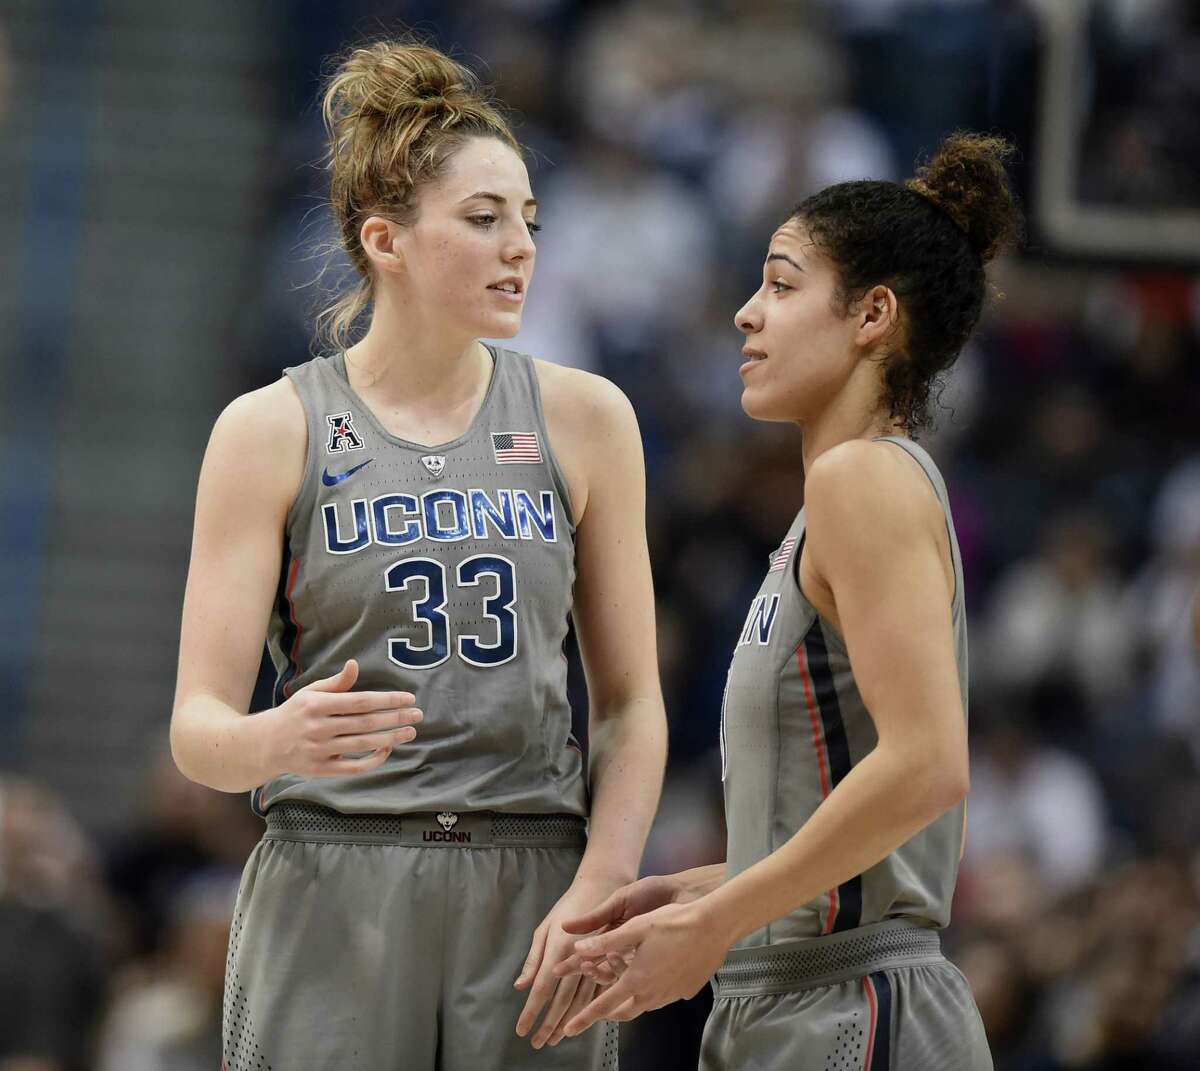 UConn’s Katie Lou Samuelson named AAC Player of the Year.